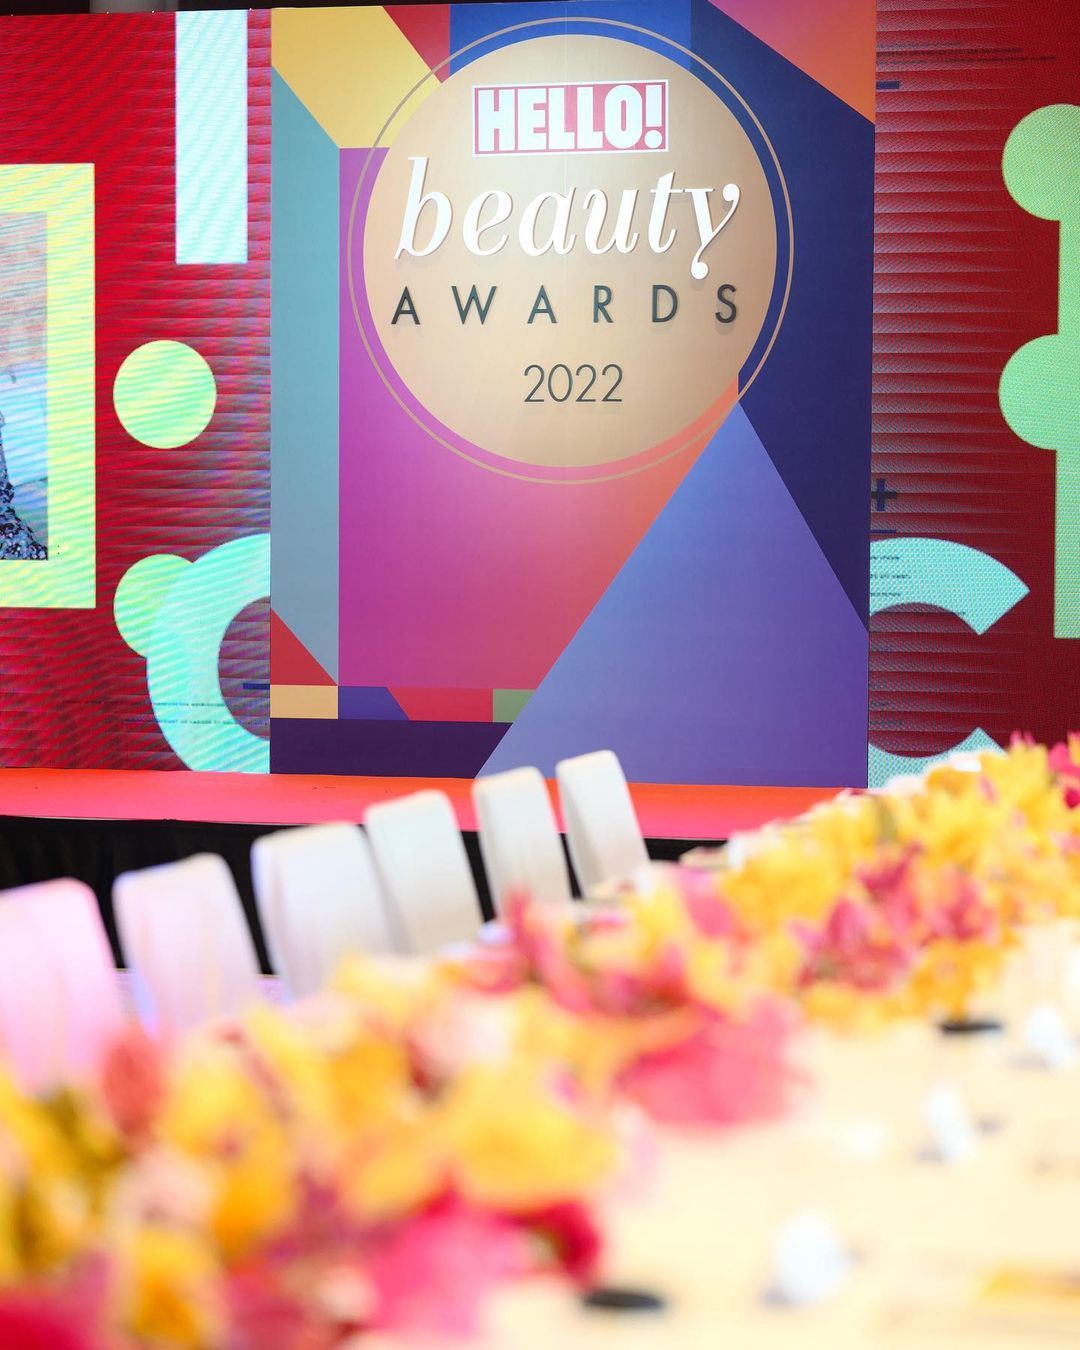 HELLO! Beauty Awards 2022 Stage